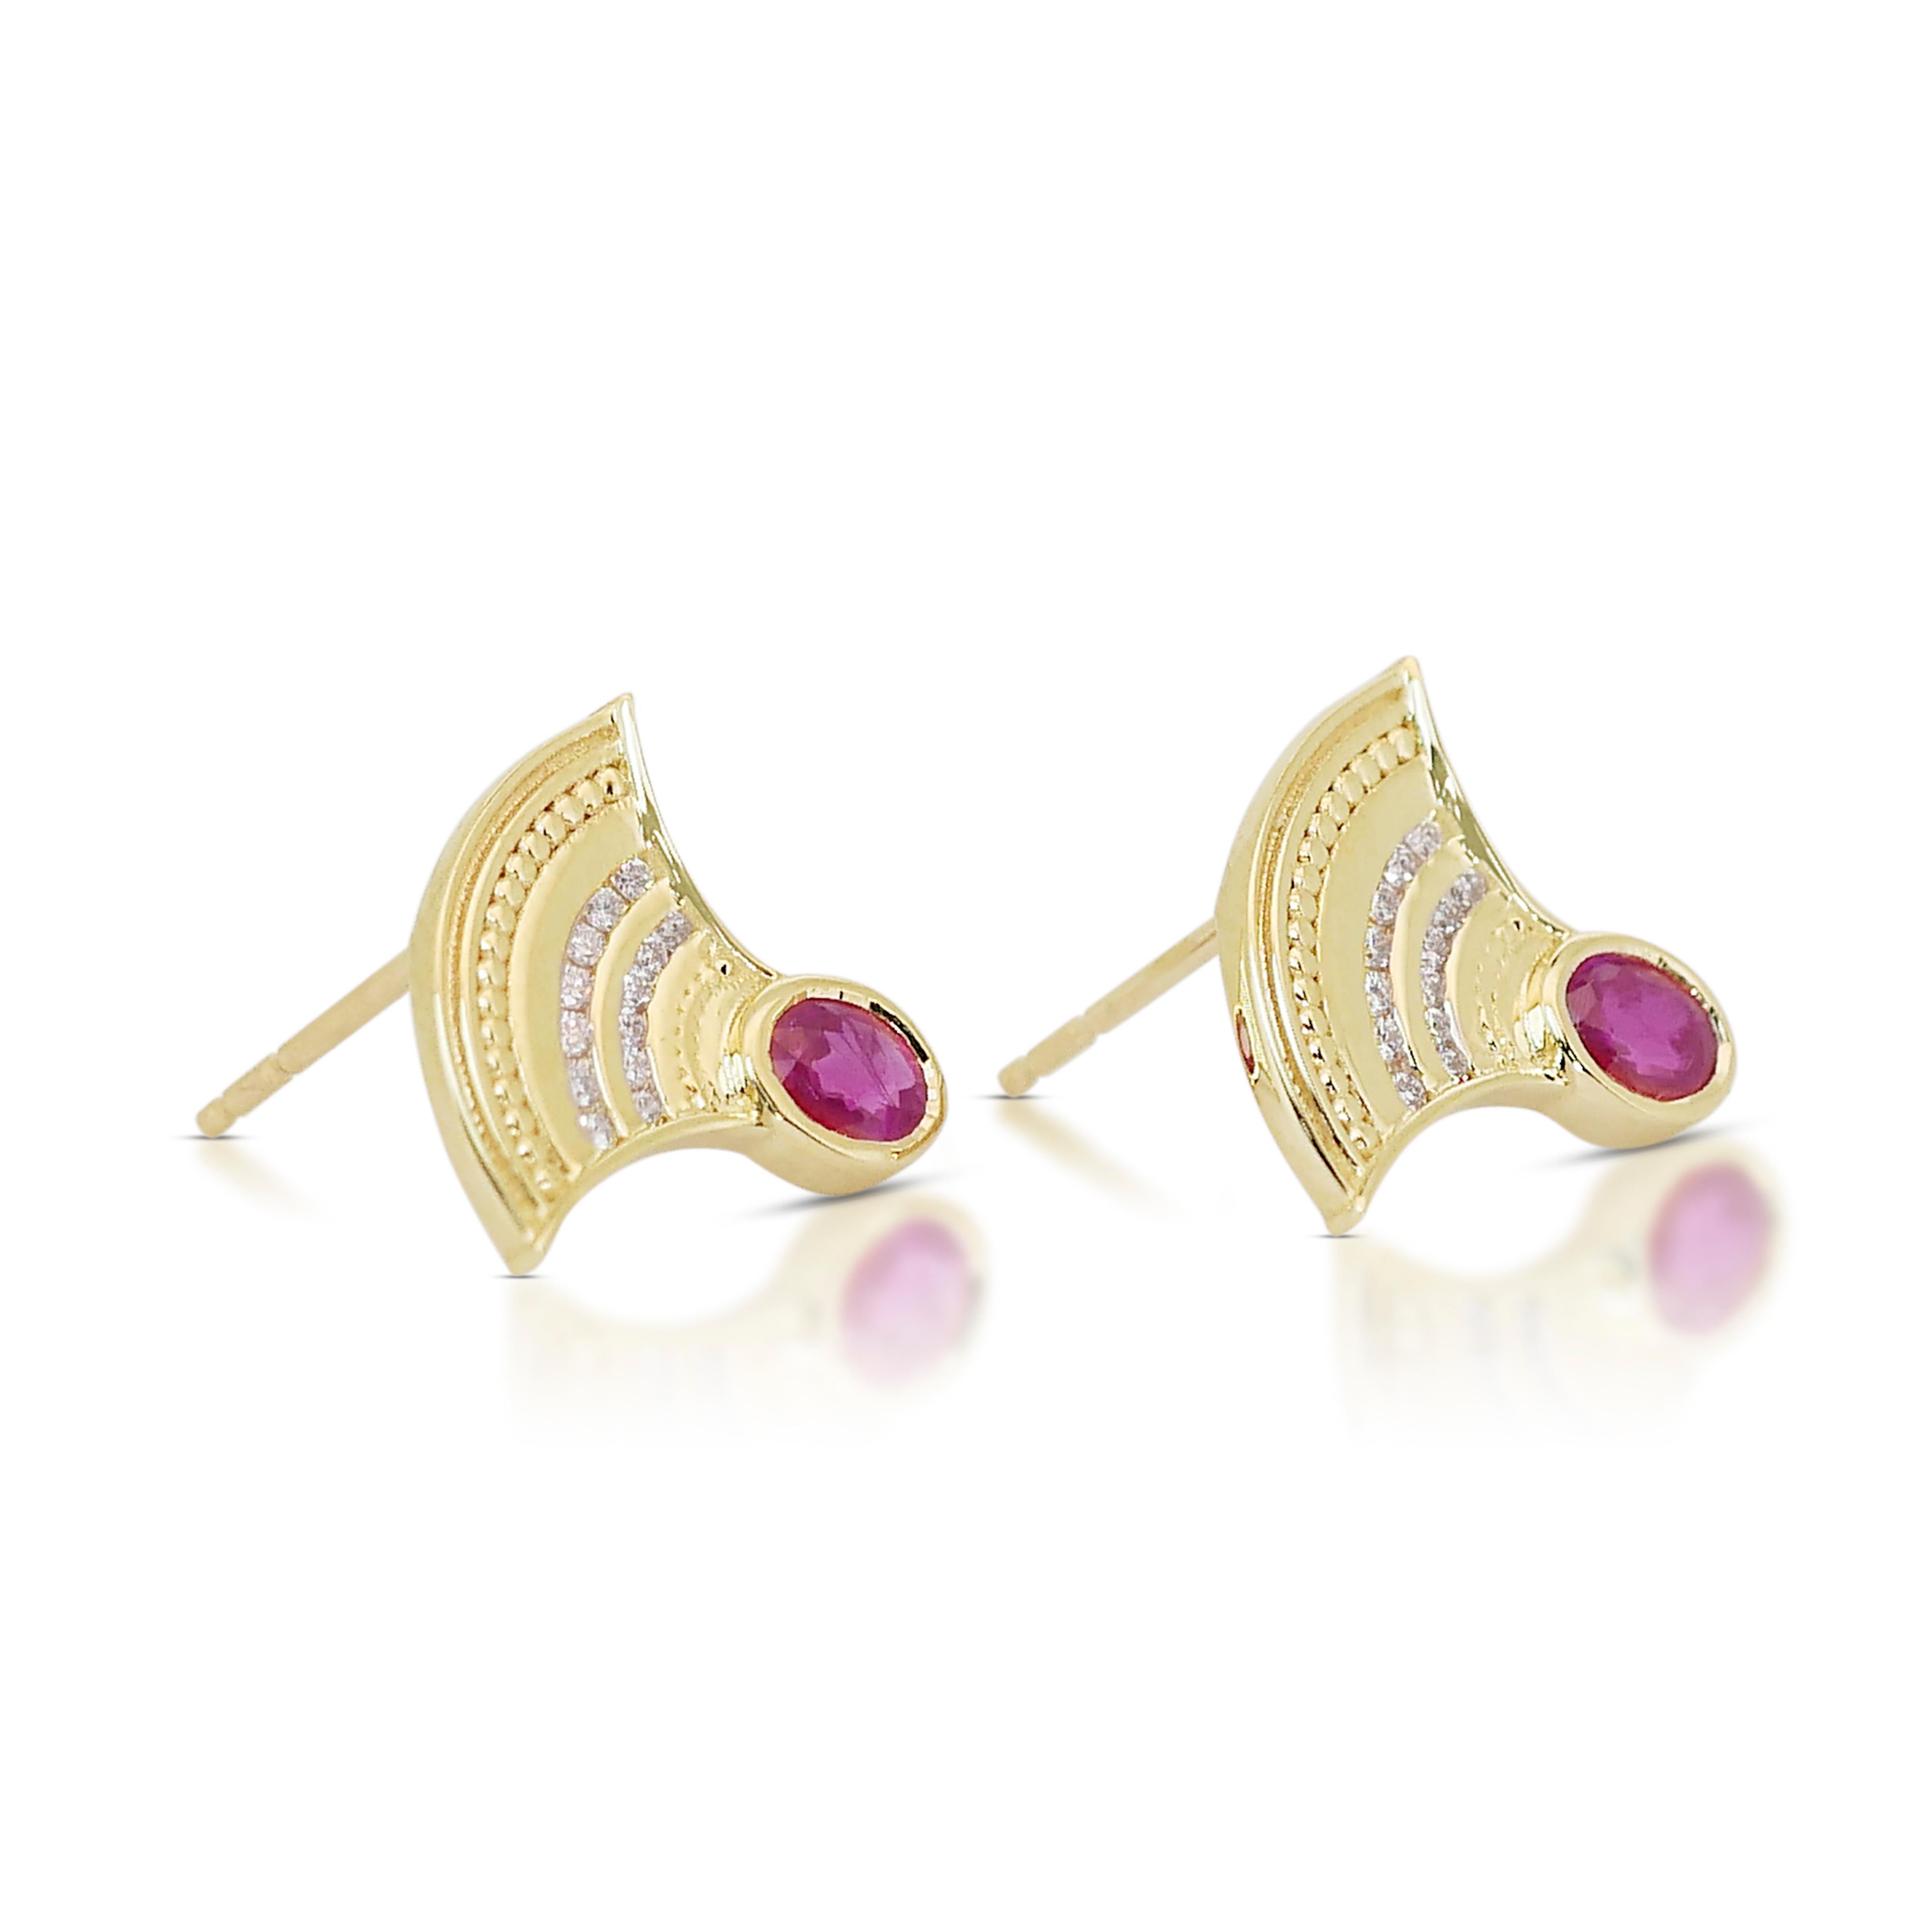 Stunning 0.75ct Rubies and Diamonds Stud Earrings in 14k Yellow Gold - AIG  In New Condition For Sale In רמת גן, IL